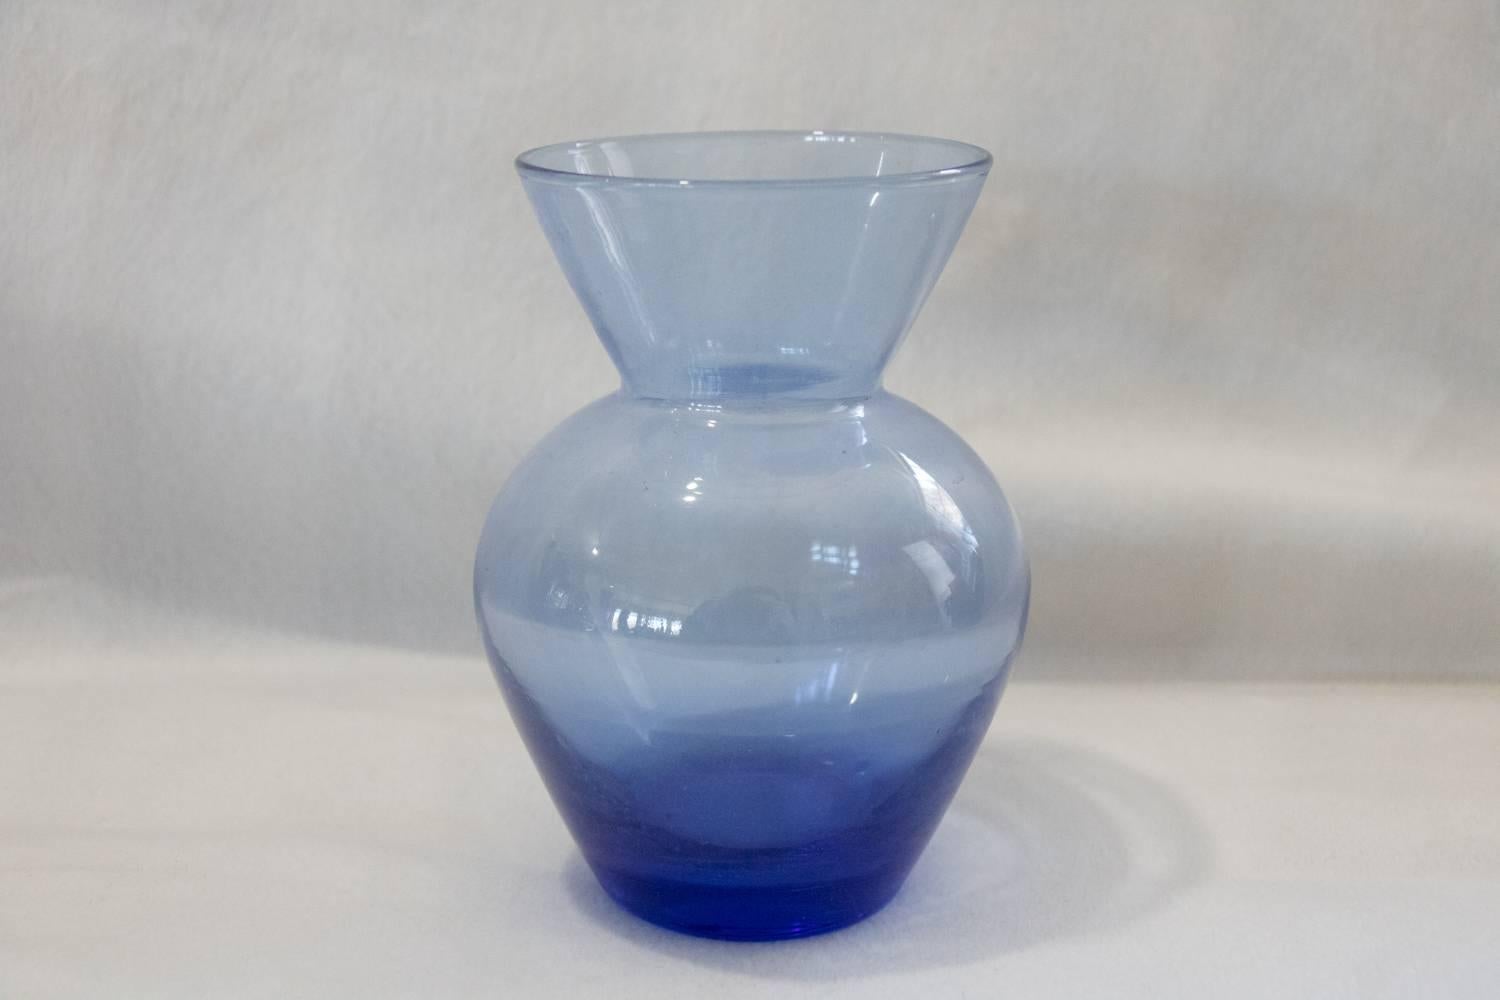 Set of Seven Glorious Blue Glass Vases Mixed Shaped Sizes and Designs Handblown 3